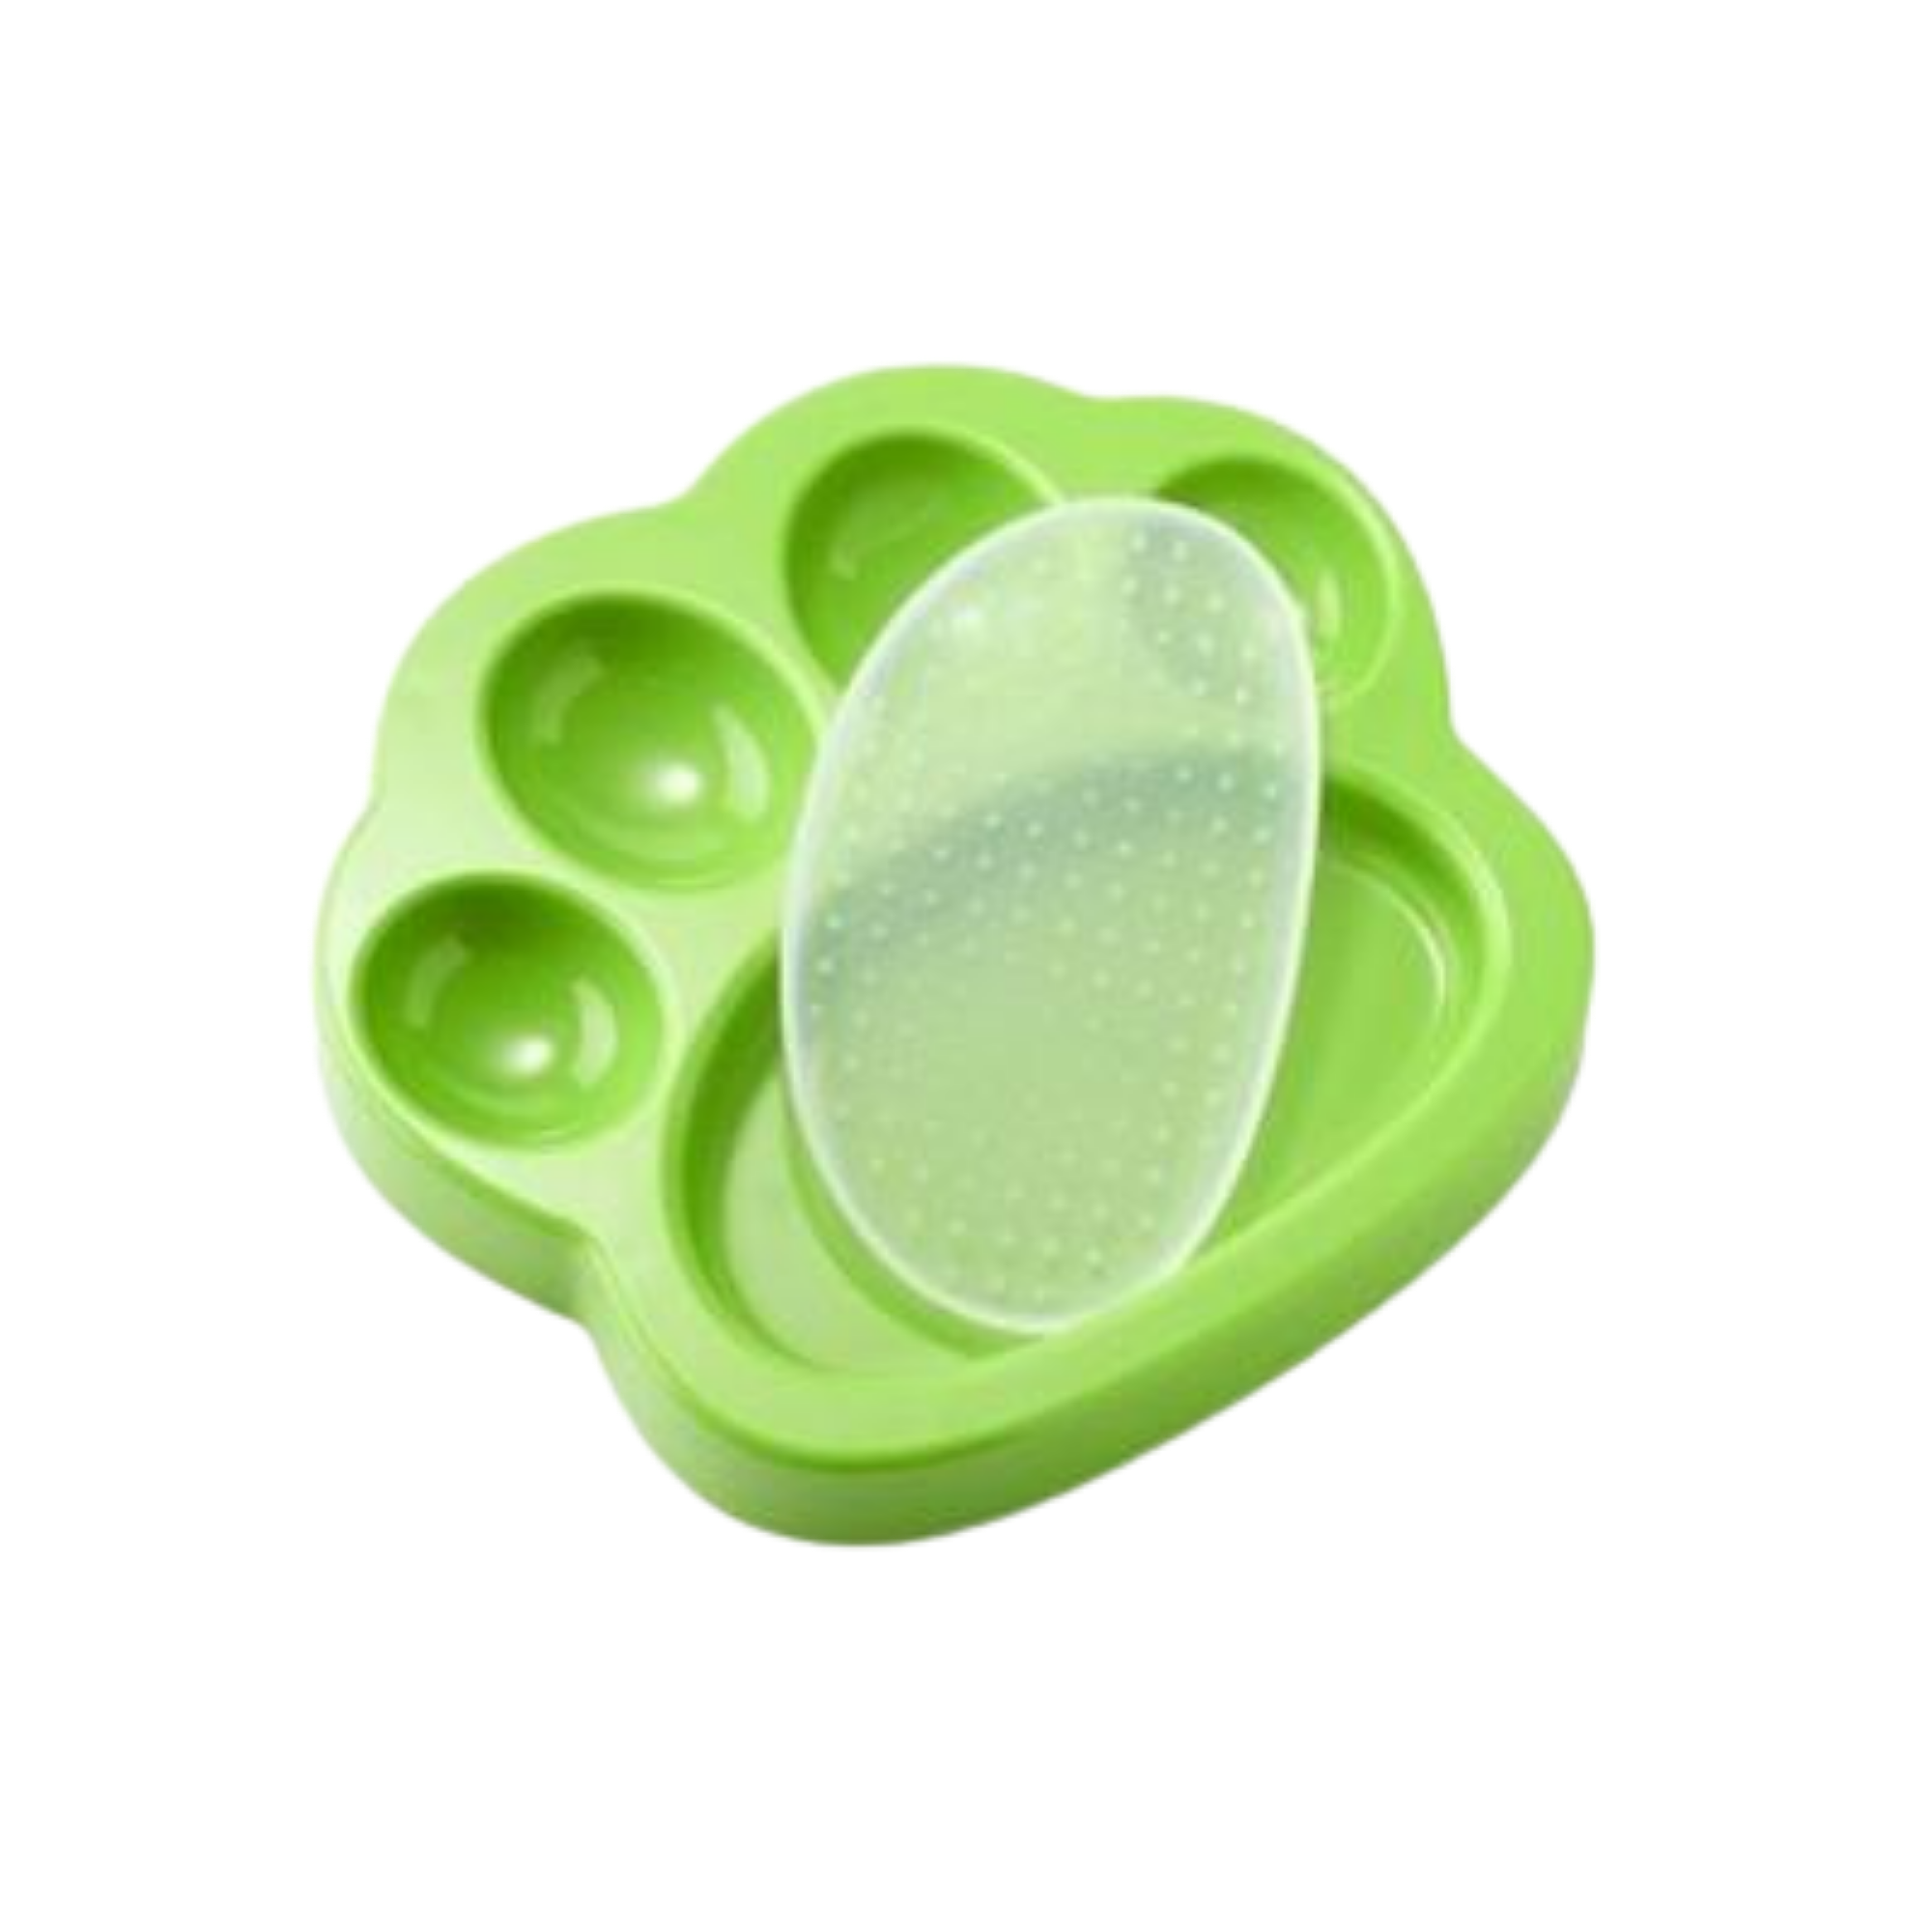 Poochie Pets PAW 2-in-1 Slow Feeder & Lick Pad Mini Green - Mutts & Co.